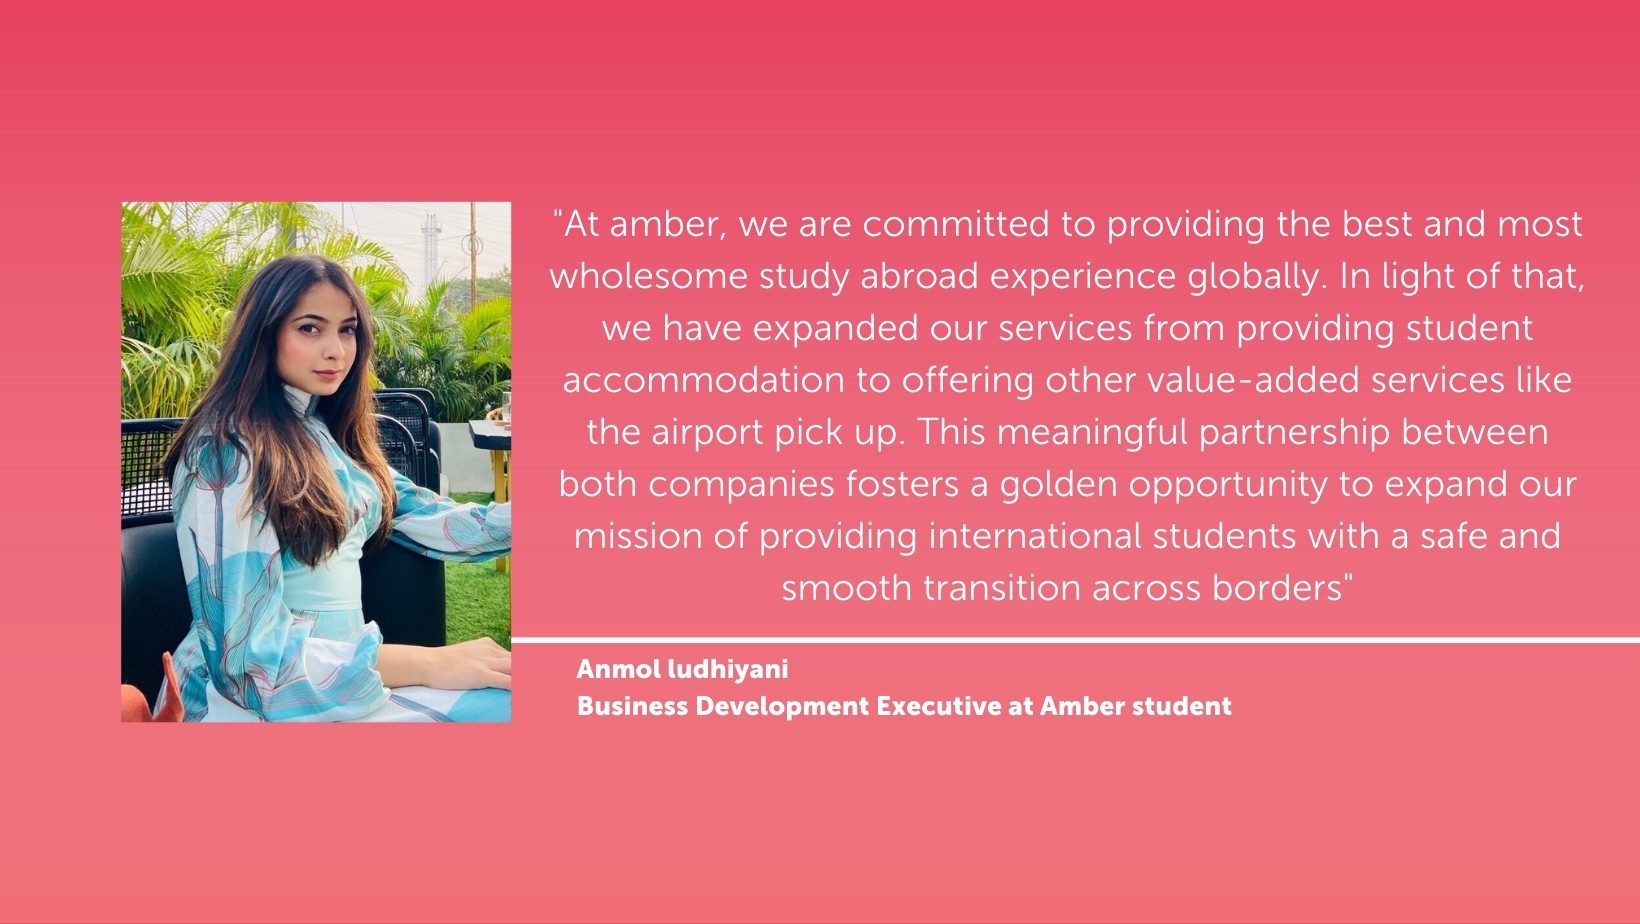 At amber, we are committed to providing the best and most wholesome study abroad experience globally. In light of that, we have expanded our services from providing student accommodation to offering other value-added services like the airport pick up. This meaningful partnership between both companies fosters a golden opportunity to expand our mission of providing international students with a safe and smooth transition across borders, quote by Anmol ludhiyani, Business Development Executive at Amber student